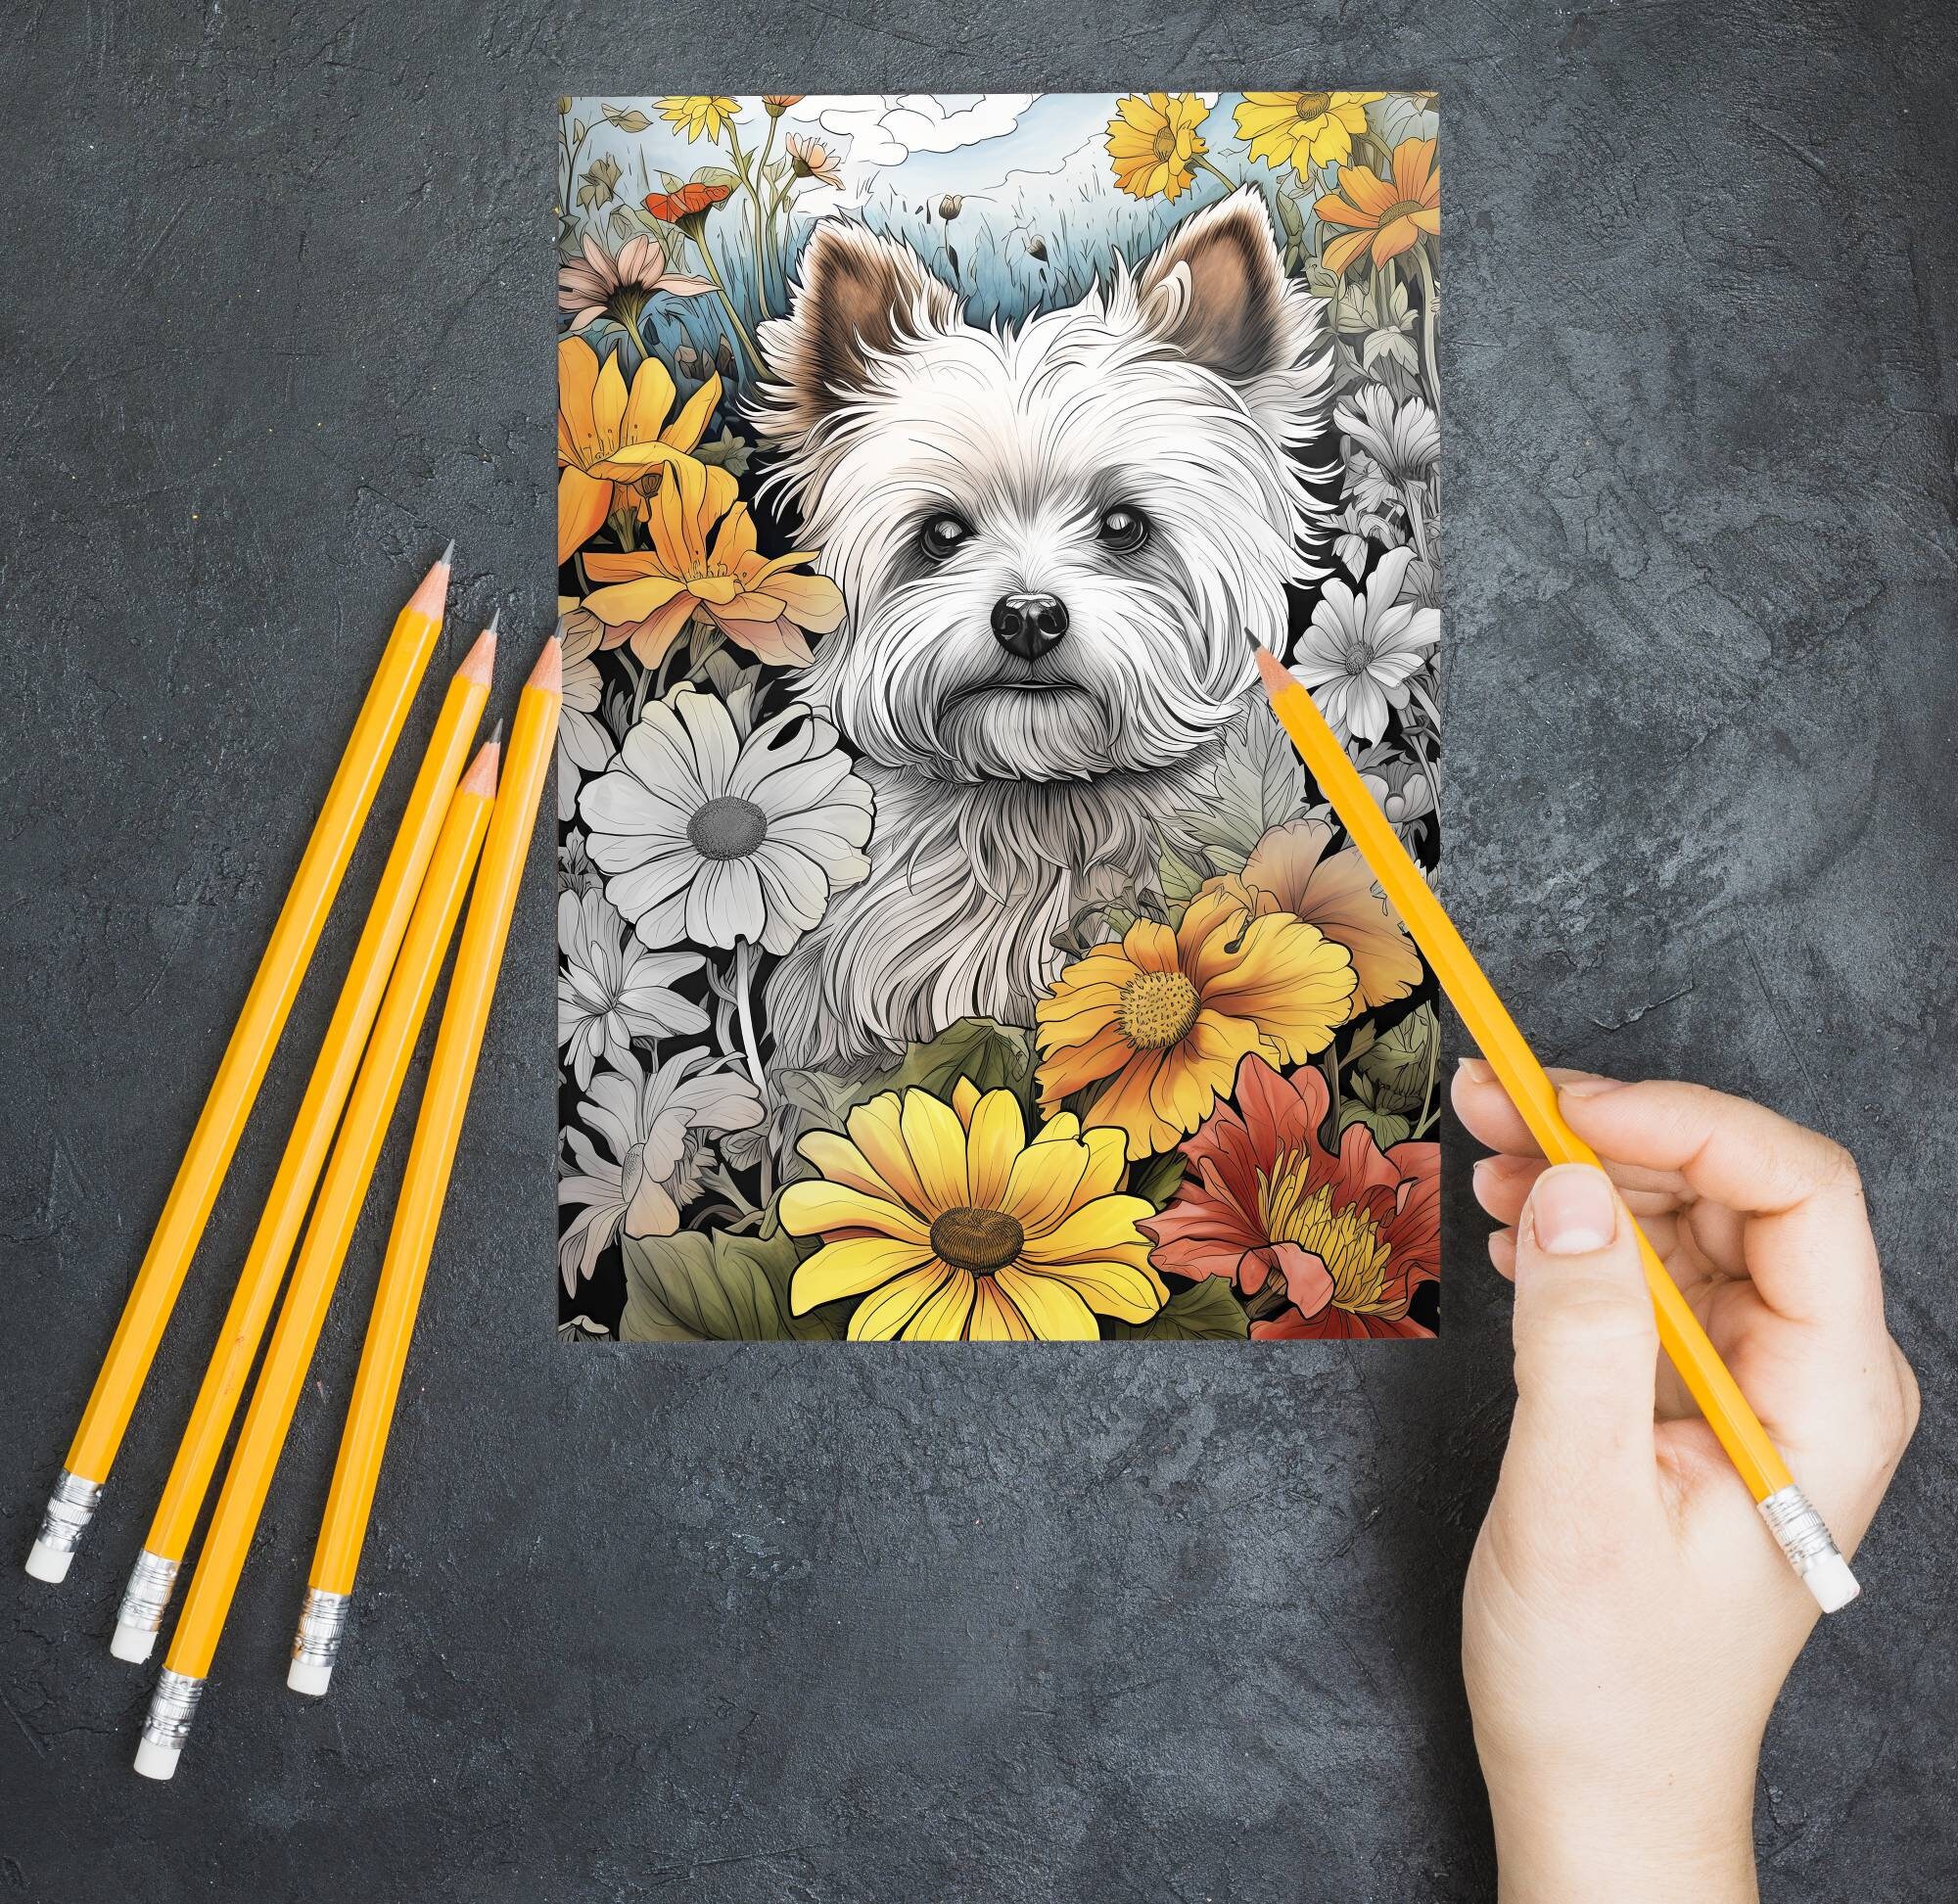 West highland white terrier westie dog coloring pages premium coloring sheets coloring book a size printable digital pdf download